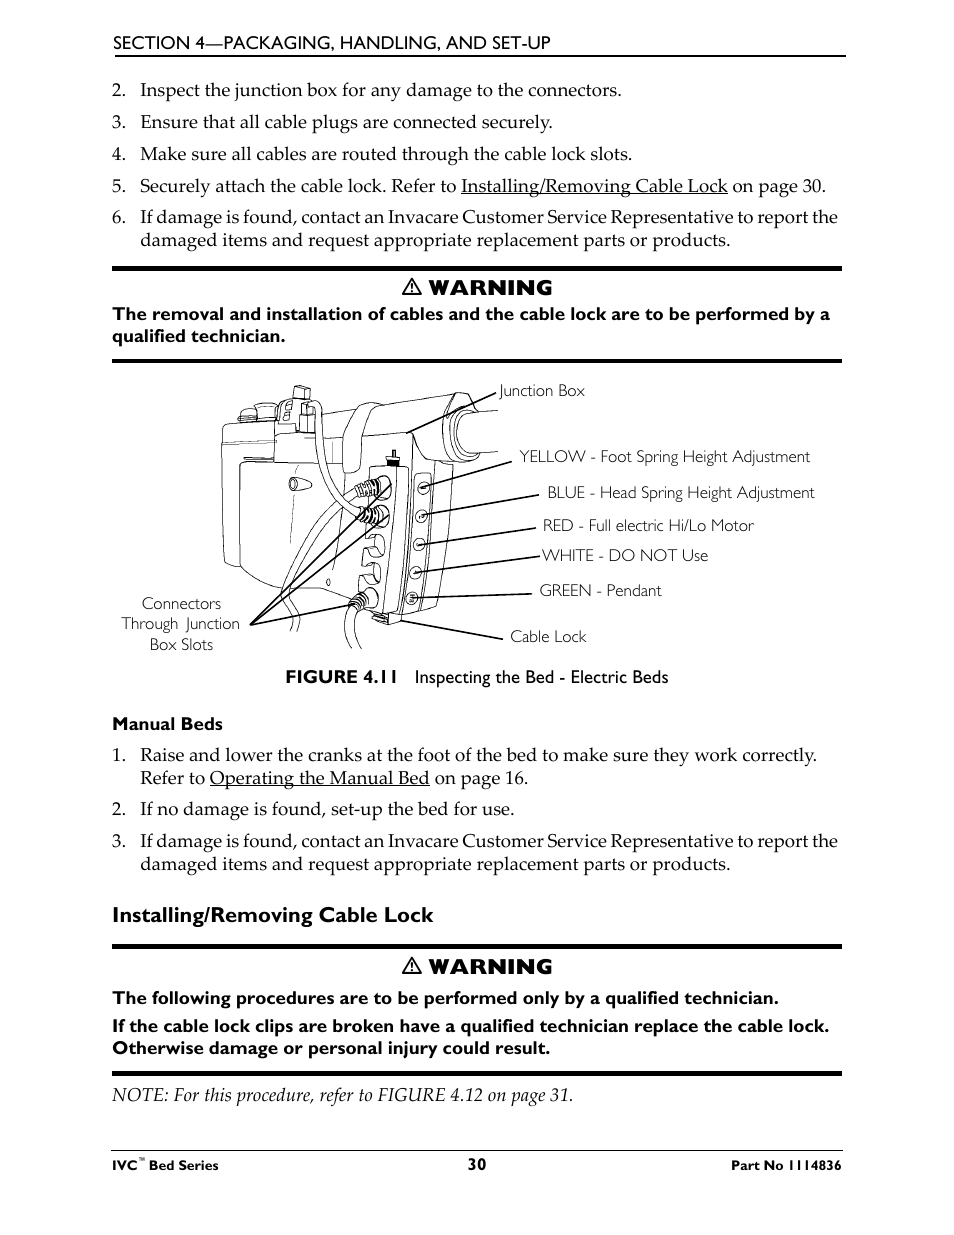 Installing/removing cable lock, Ƽ warning, Installing/removing cable lock ƽ warning | Activeforever Invacare Semi-Electric Home Care Hospital Bed User Manual | Page 30 / 39